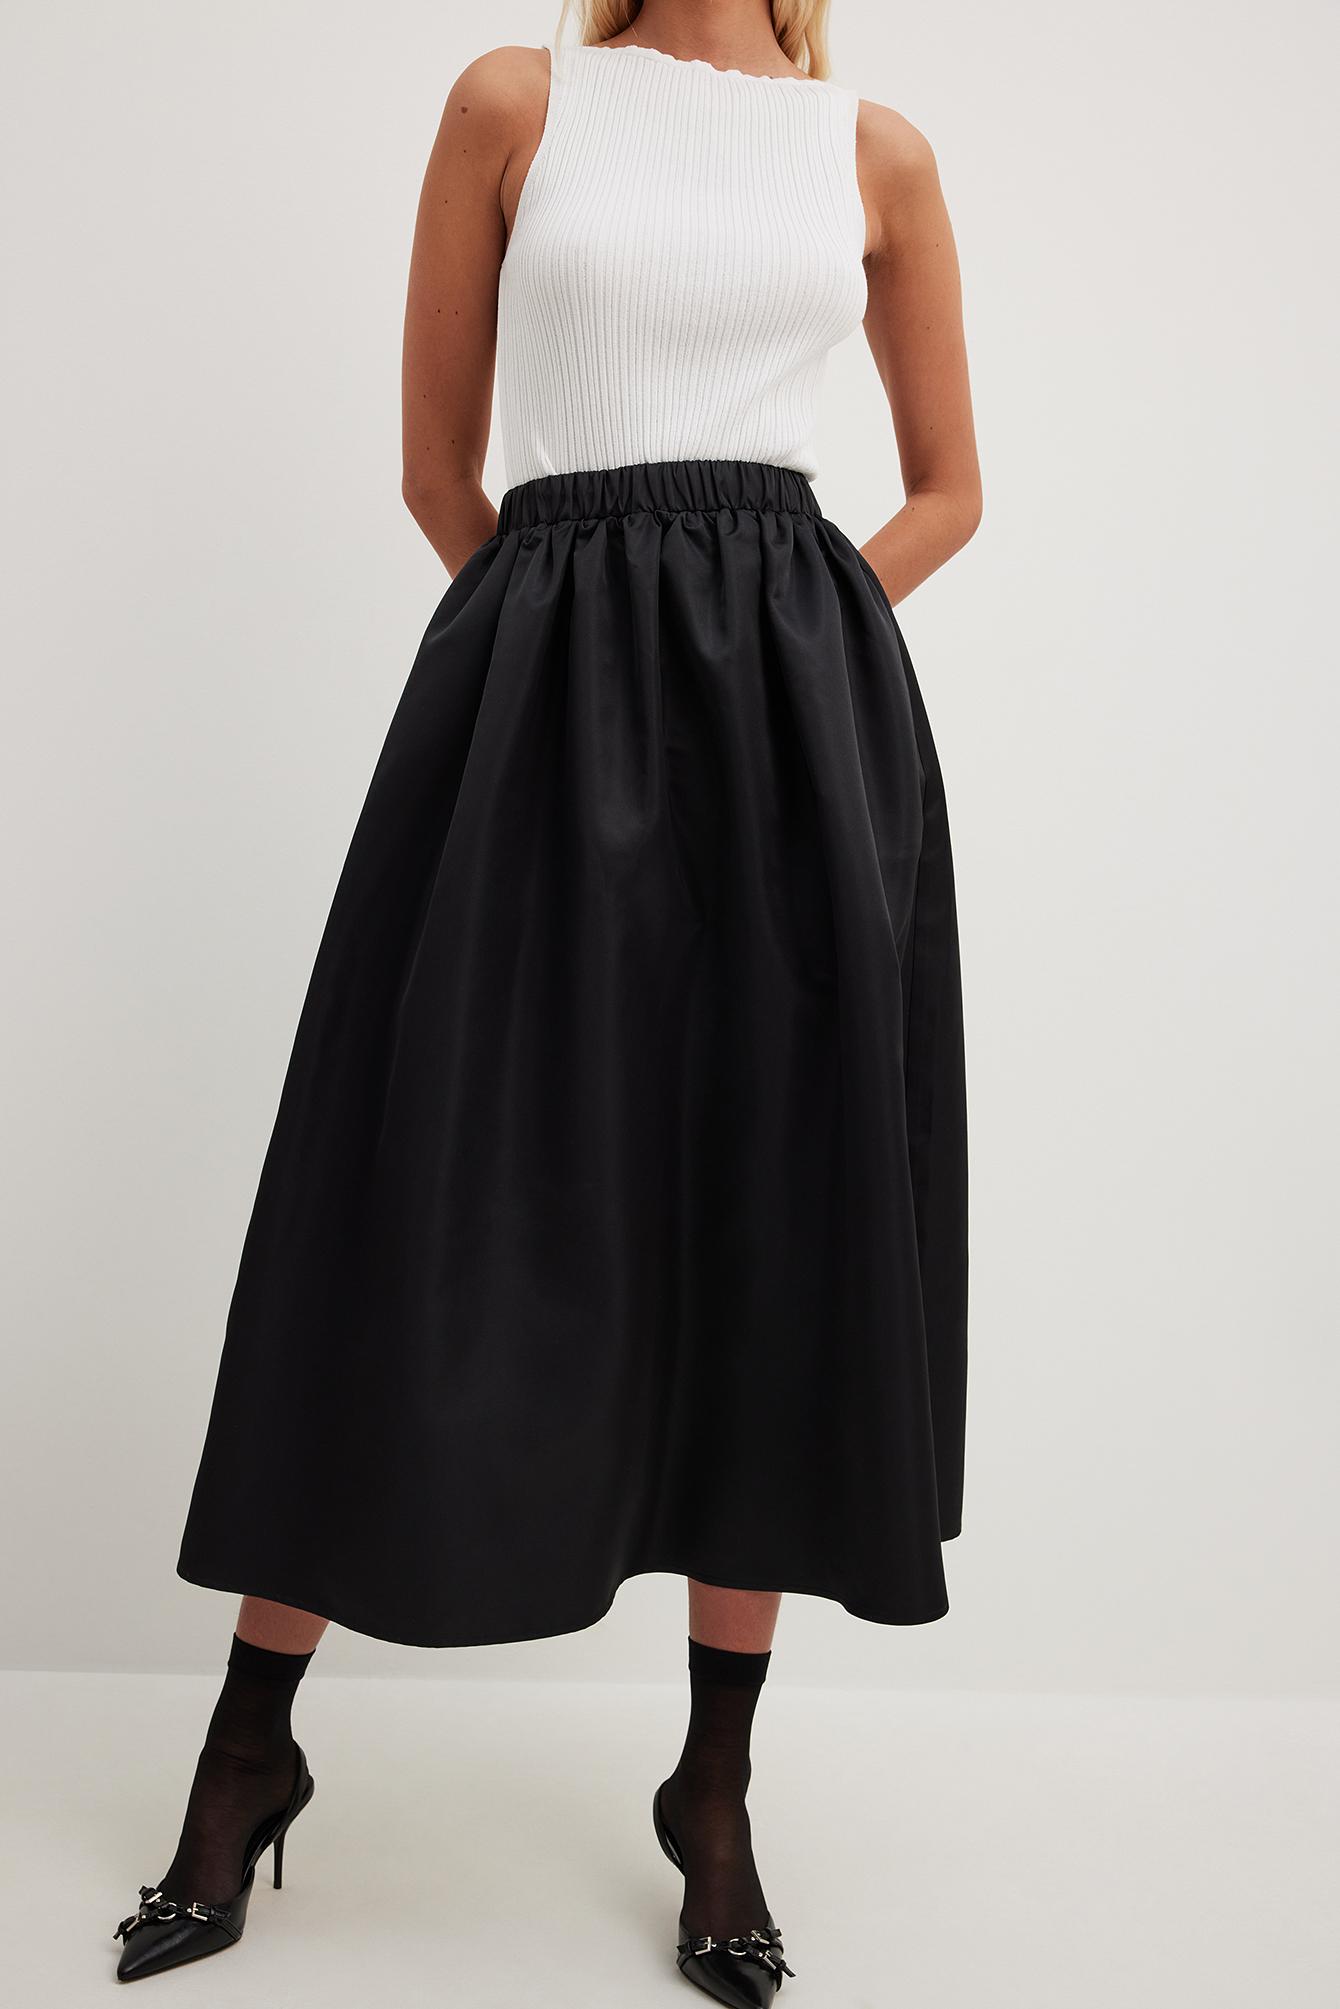 Ways To Wear A Black Slip Skirt  9 Chic Outfit Ideas  Sydne Style